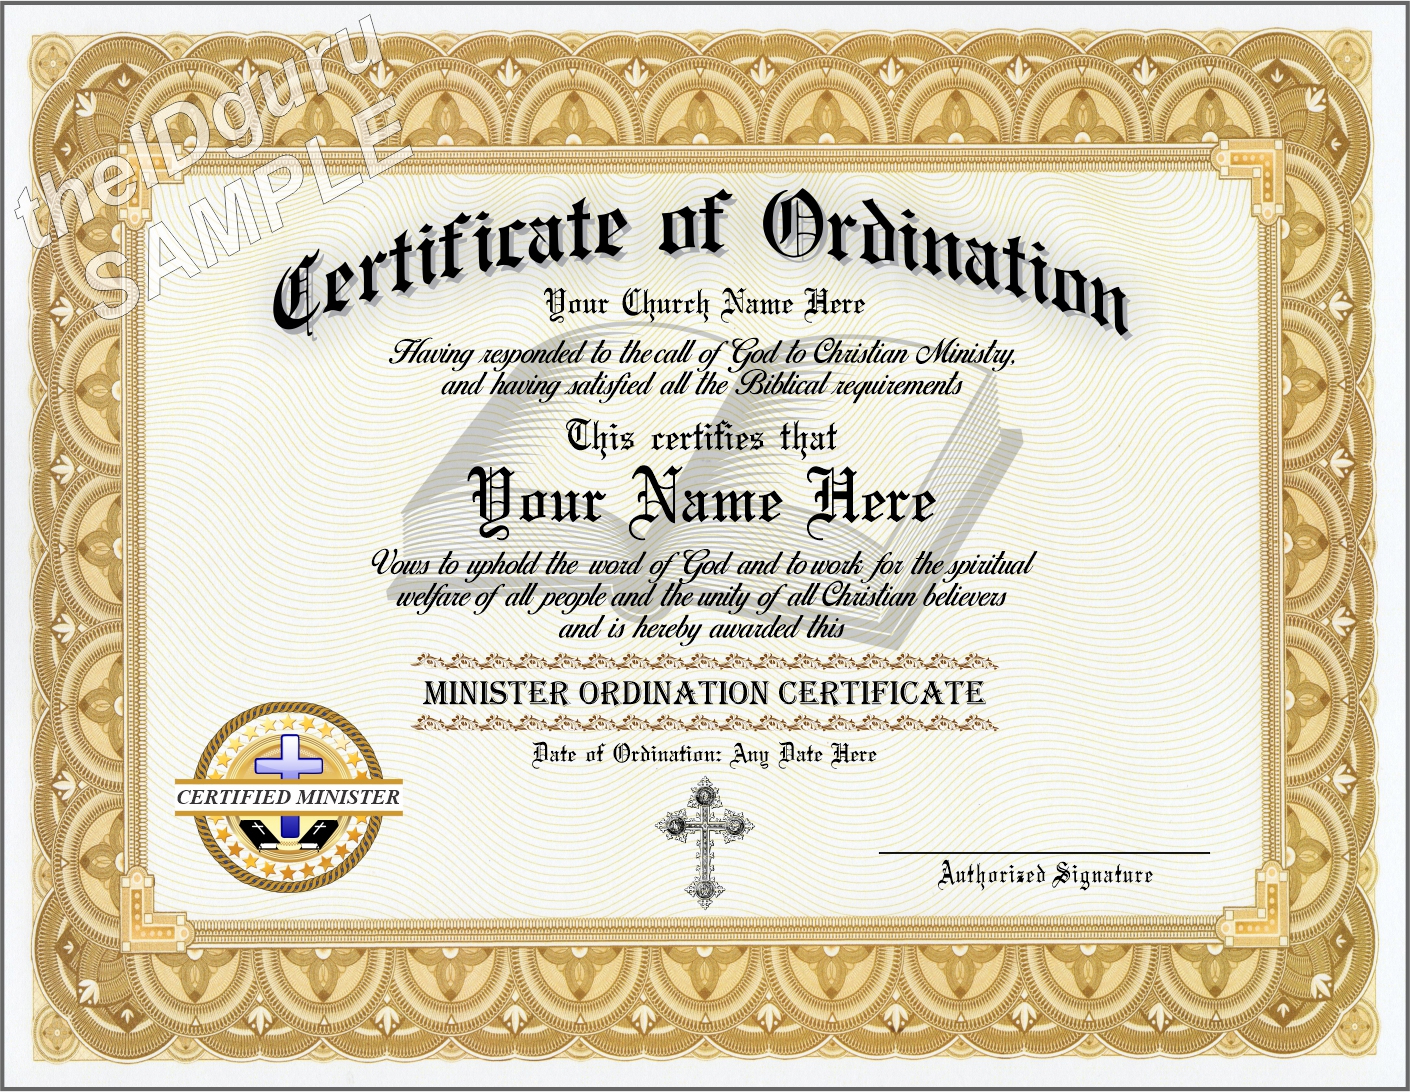 How To Get A Minister License Online